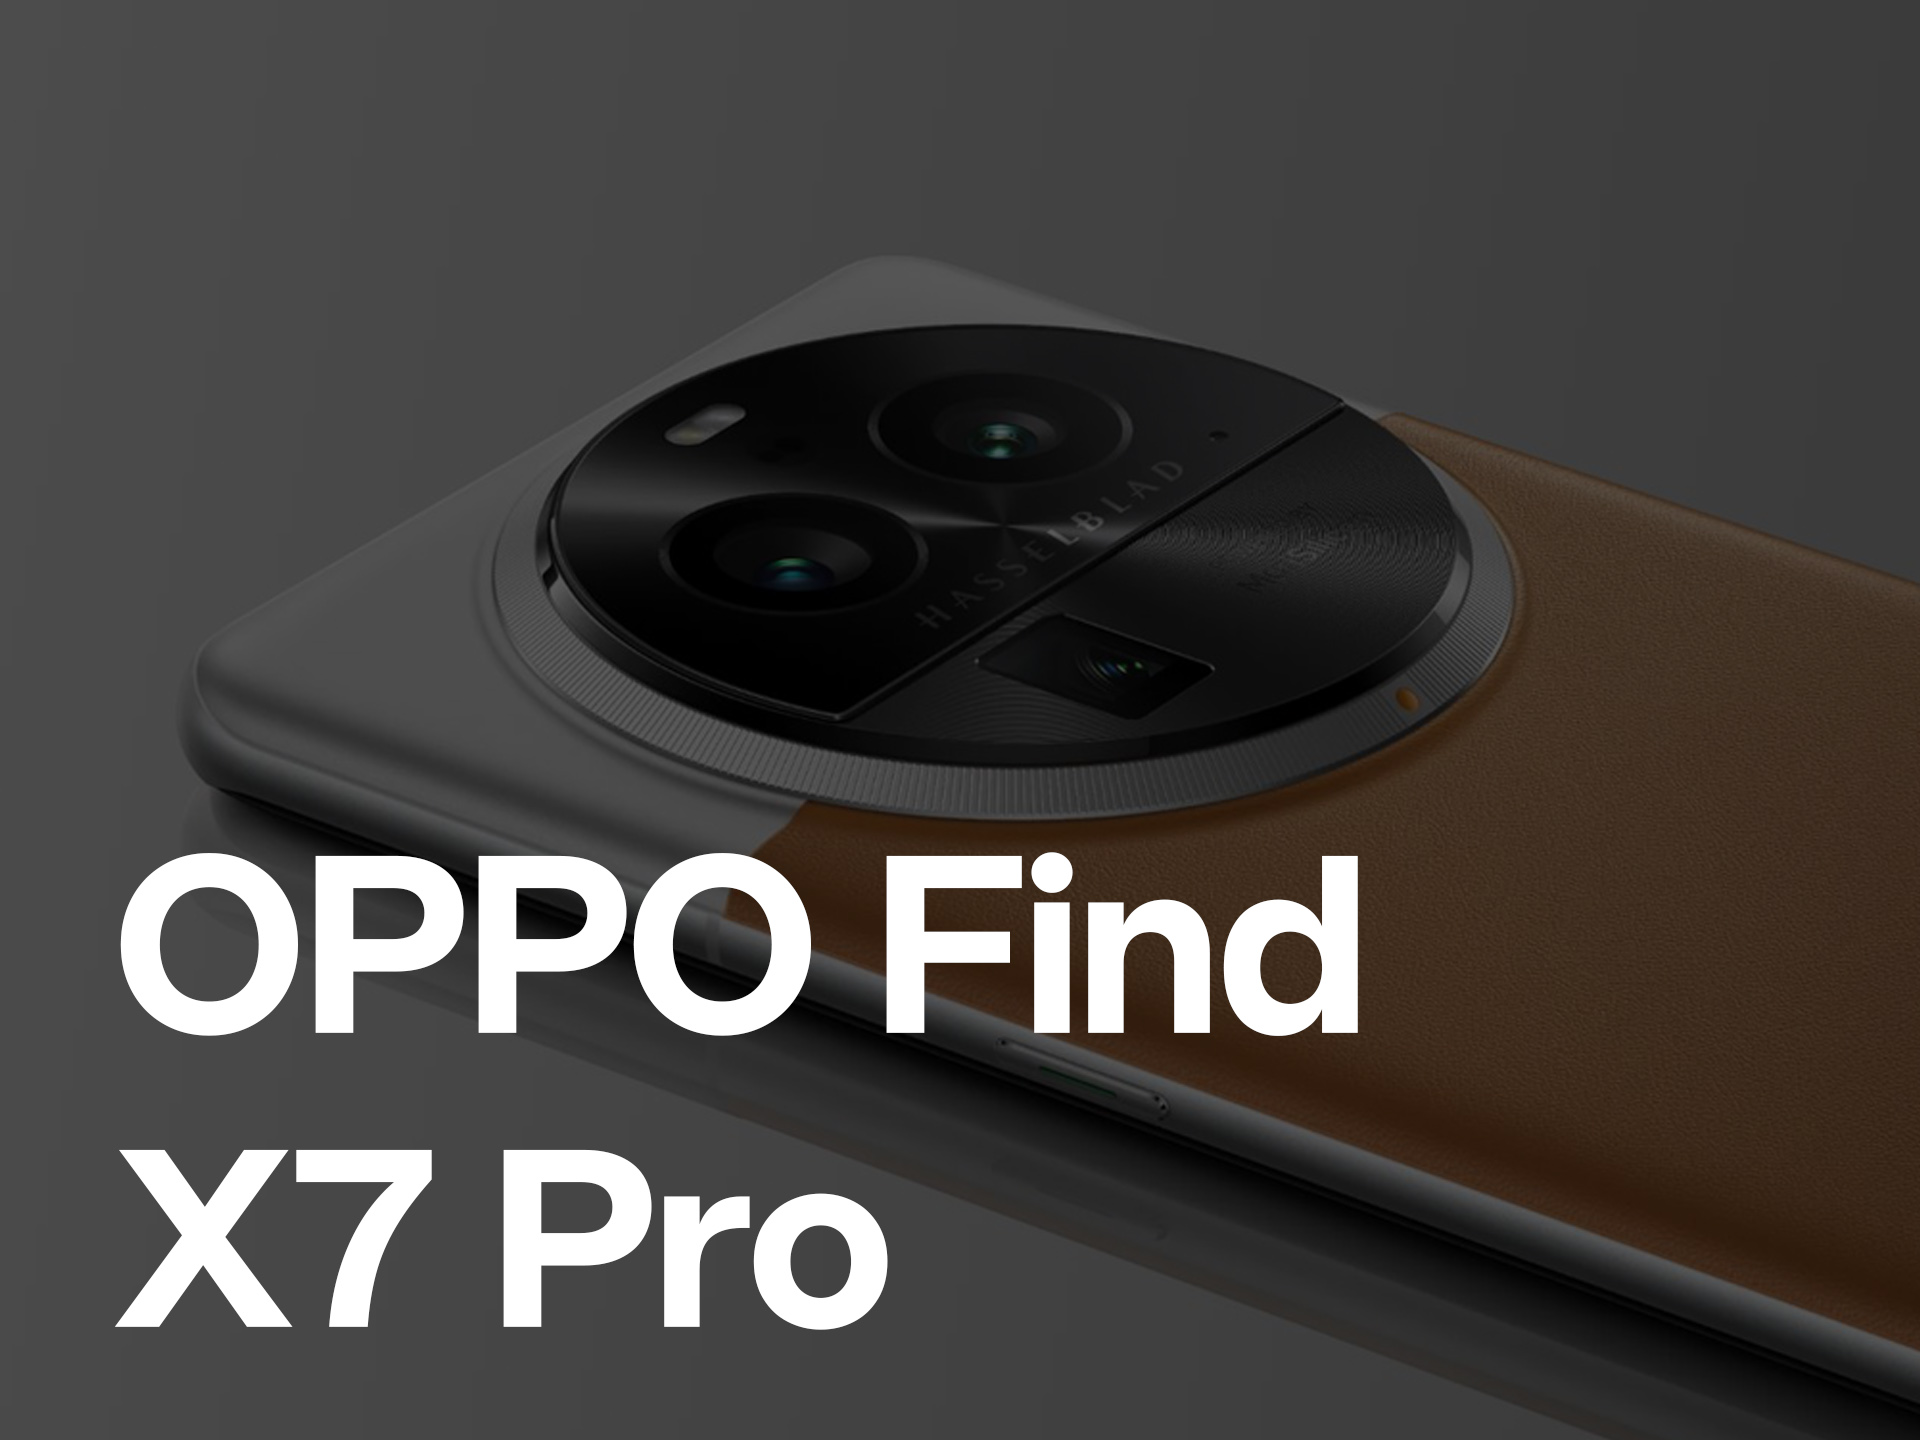 The Oppo Find X7 Ultra is the first phone with two periscope zoom cameras